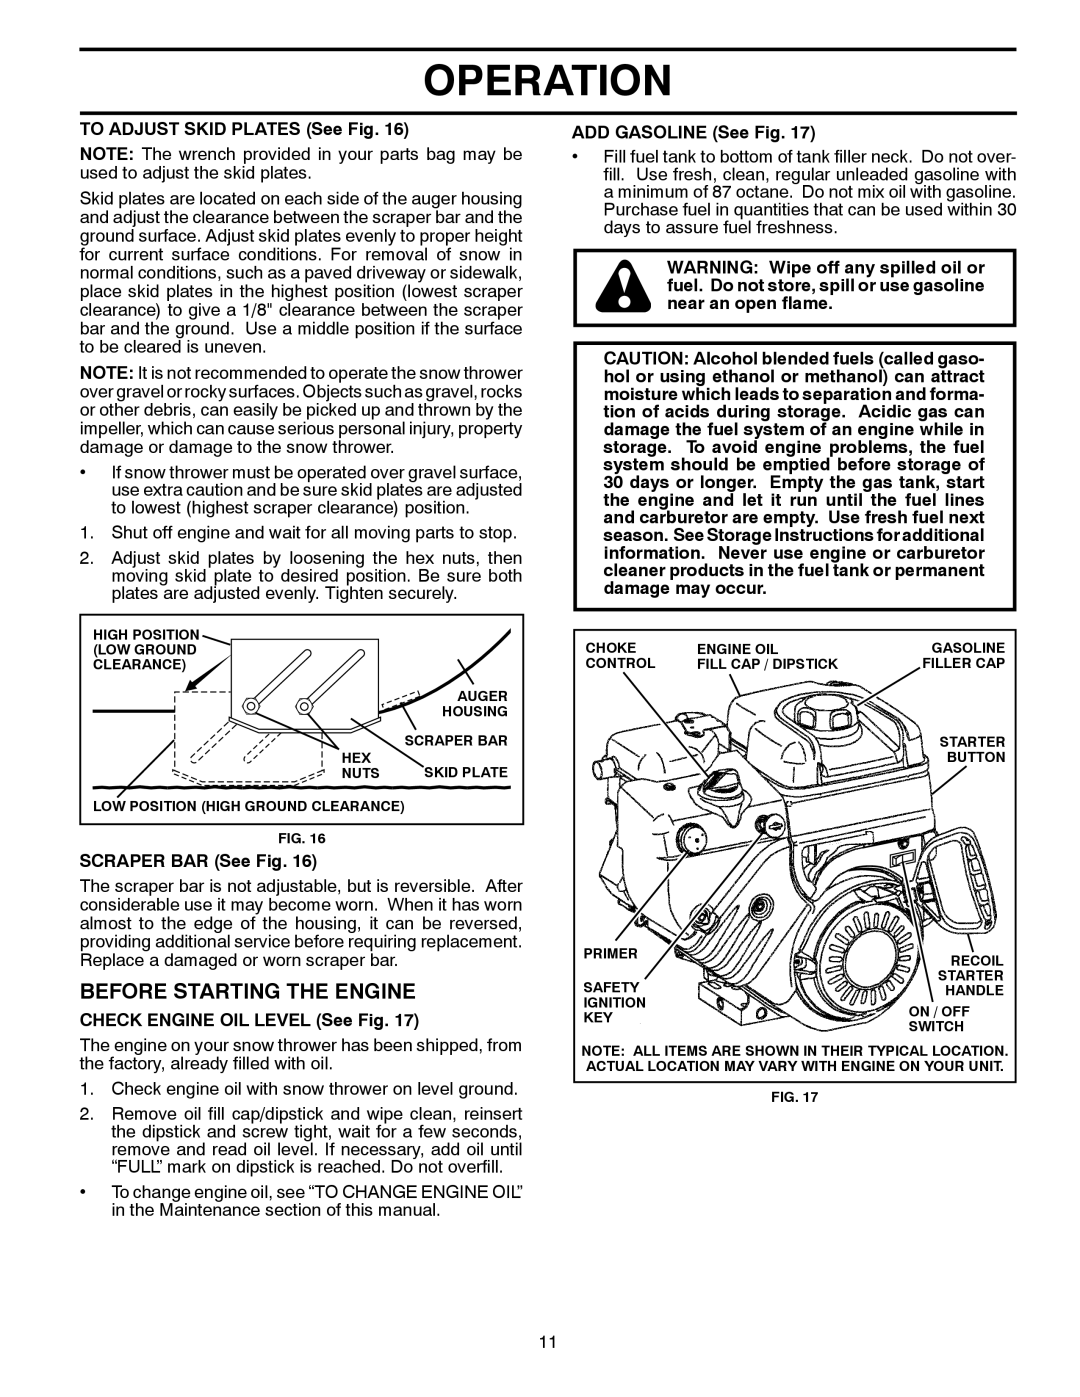 Poulan XT824ES, 96192003300 Before Starting The Engine, Operation, TO ADJUST SKID PLATES See Fig, SCRAPER BAR See Fig 